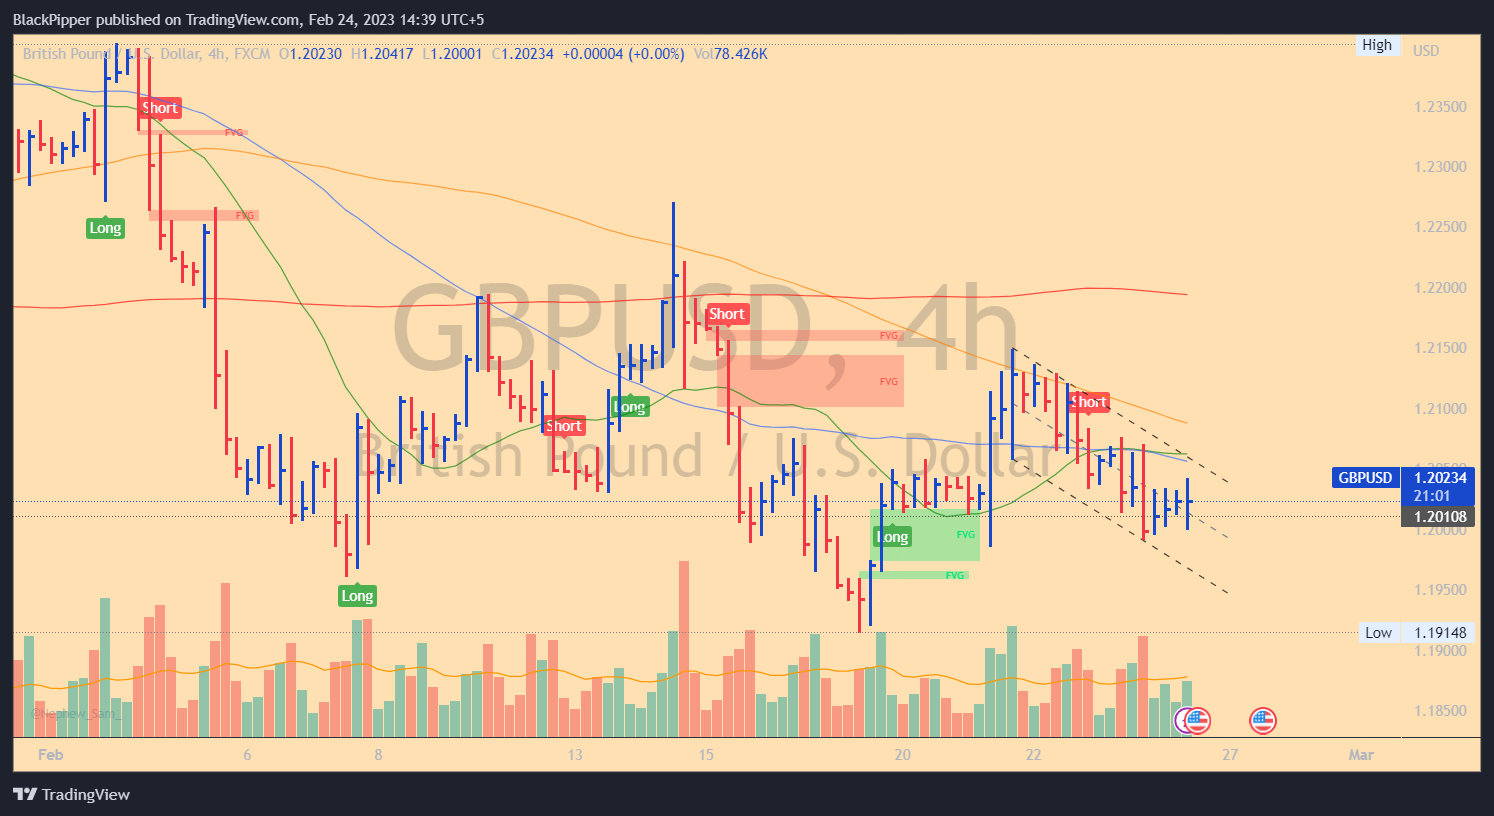 GBP/USD H4 price action